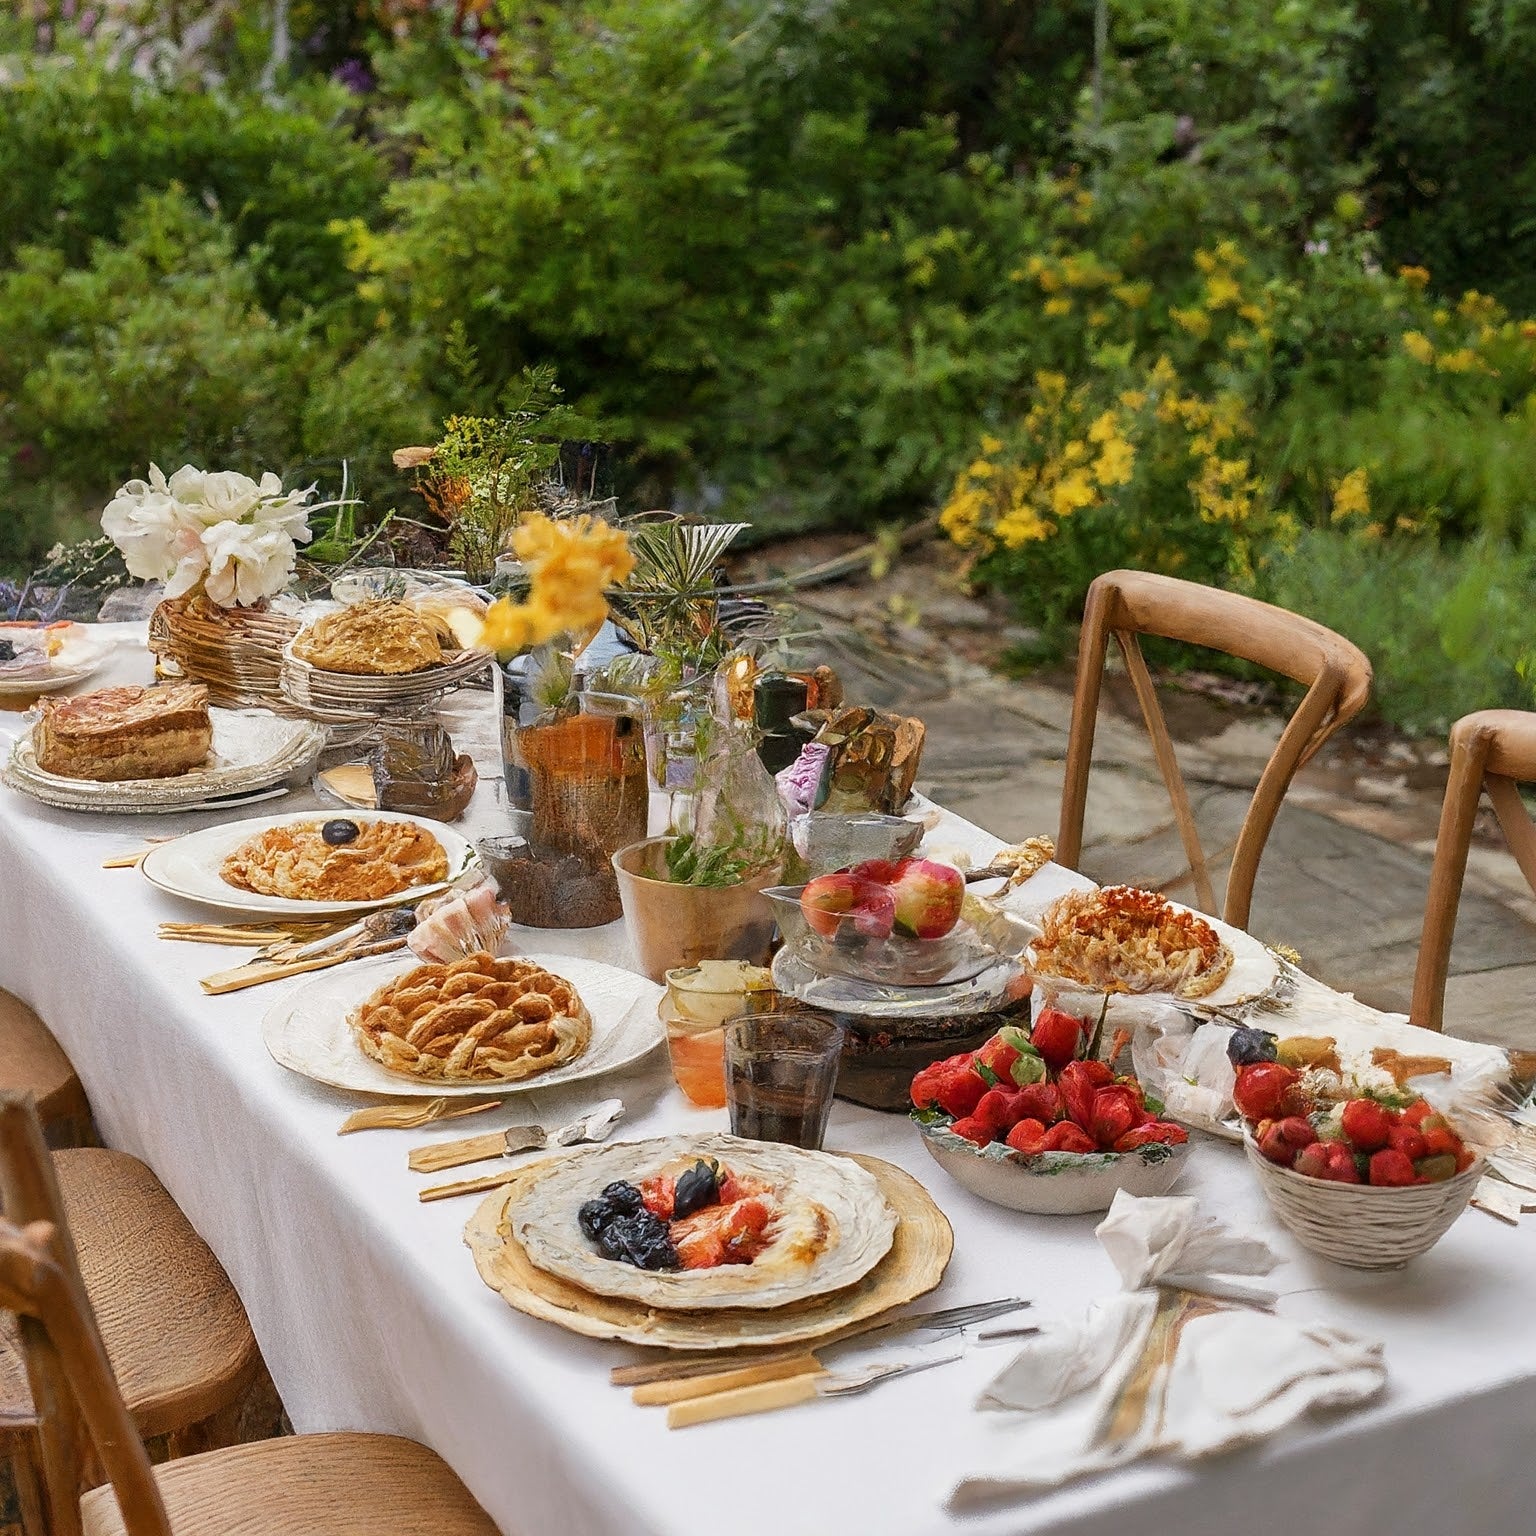 Summer Brunch Ideas: Elegant Linen Table Settings and Delicious Dishes